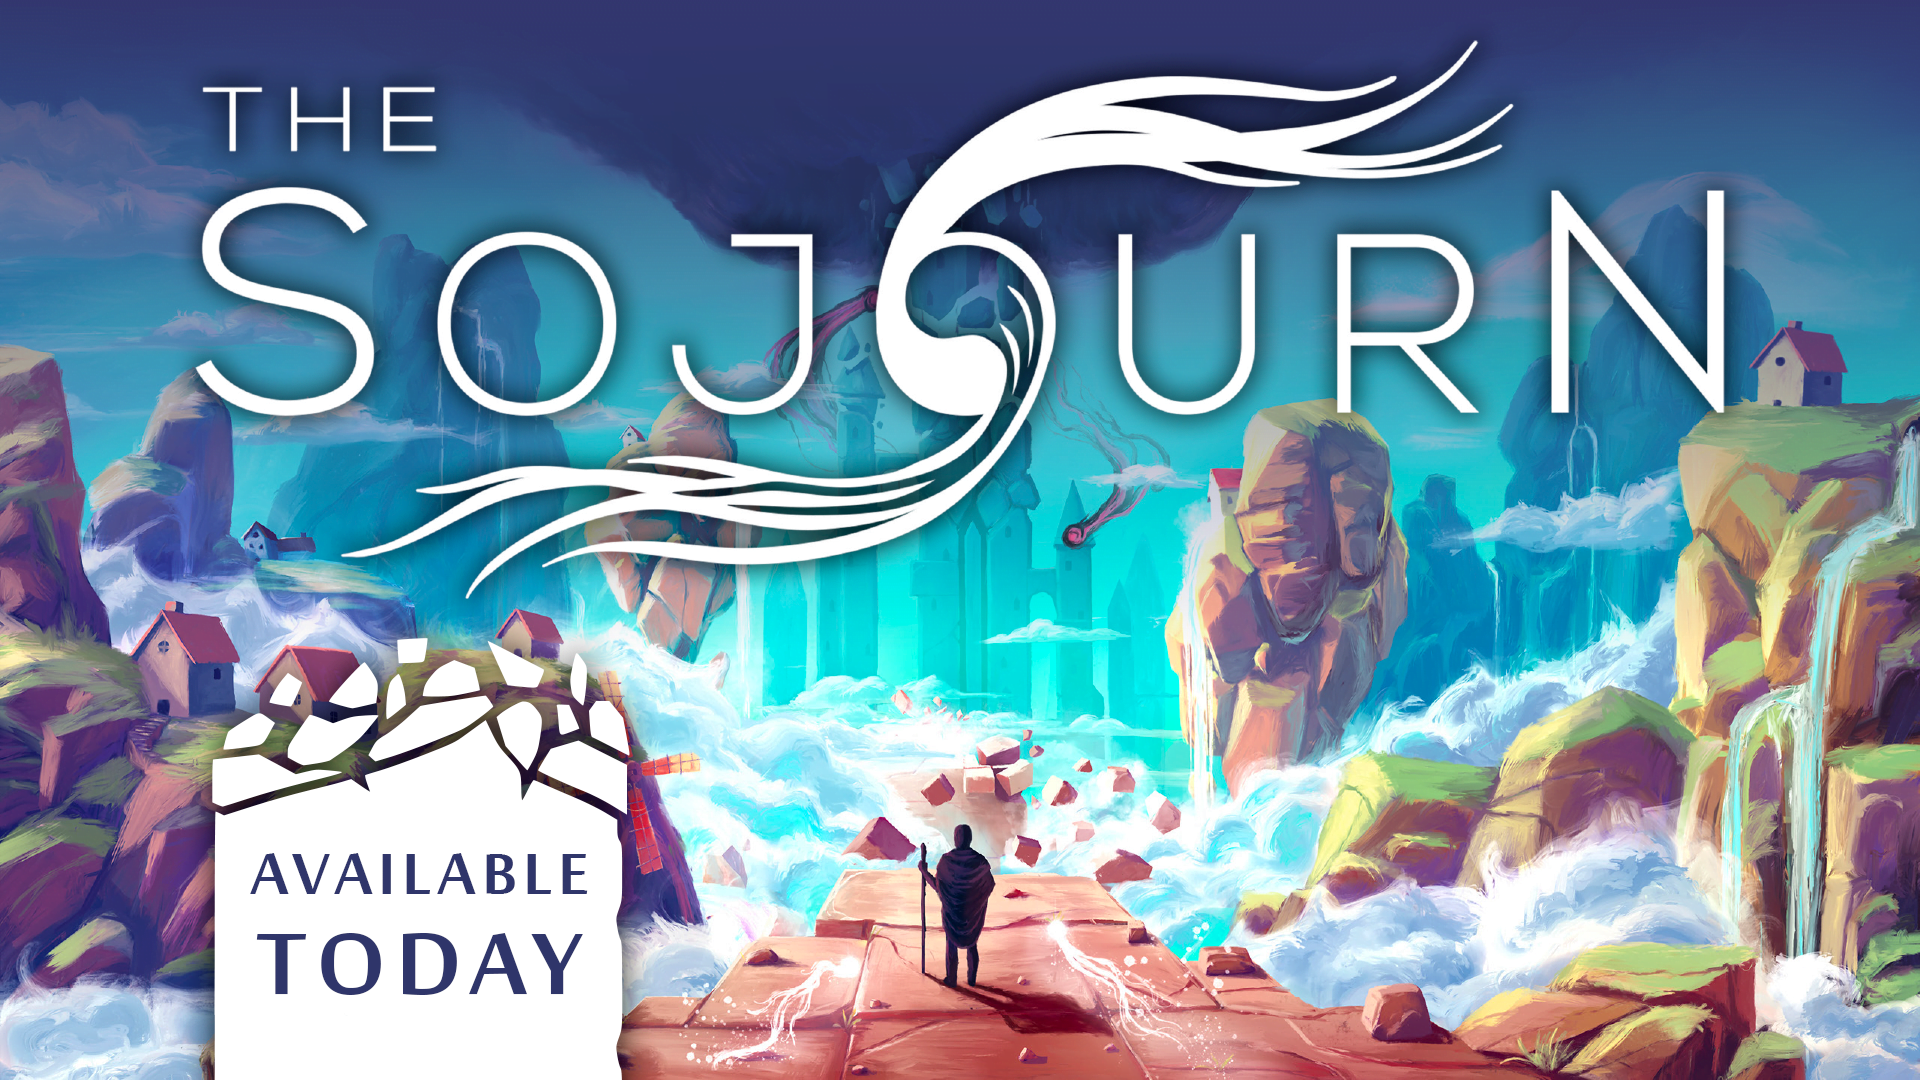 The sojourn: jogo puzzle já disponível! | the sojourn available today | epic games store, pc, playstation 4, shifting tides, the sojourn, xbox one | the sojourn notícias